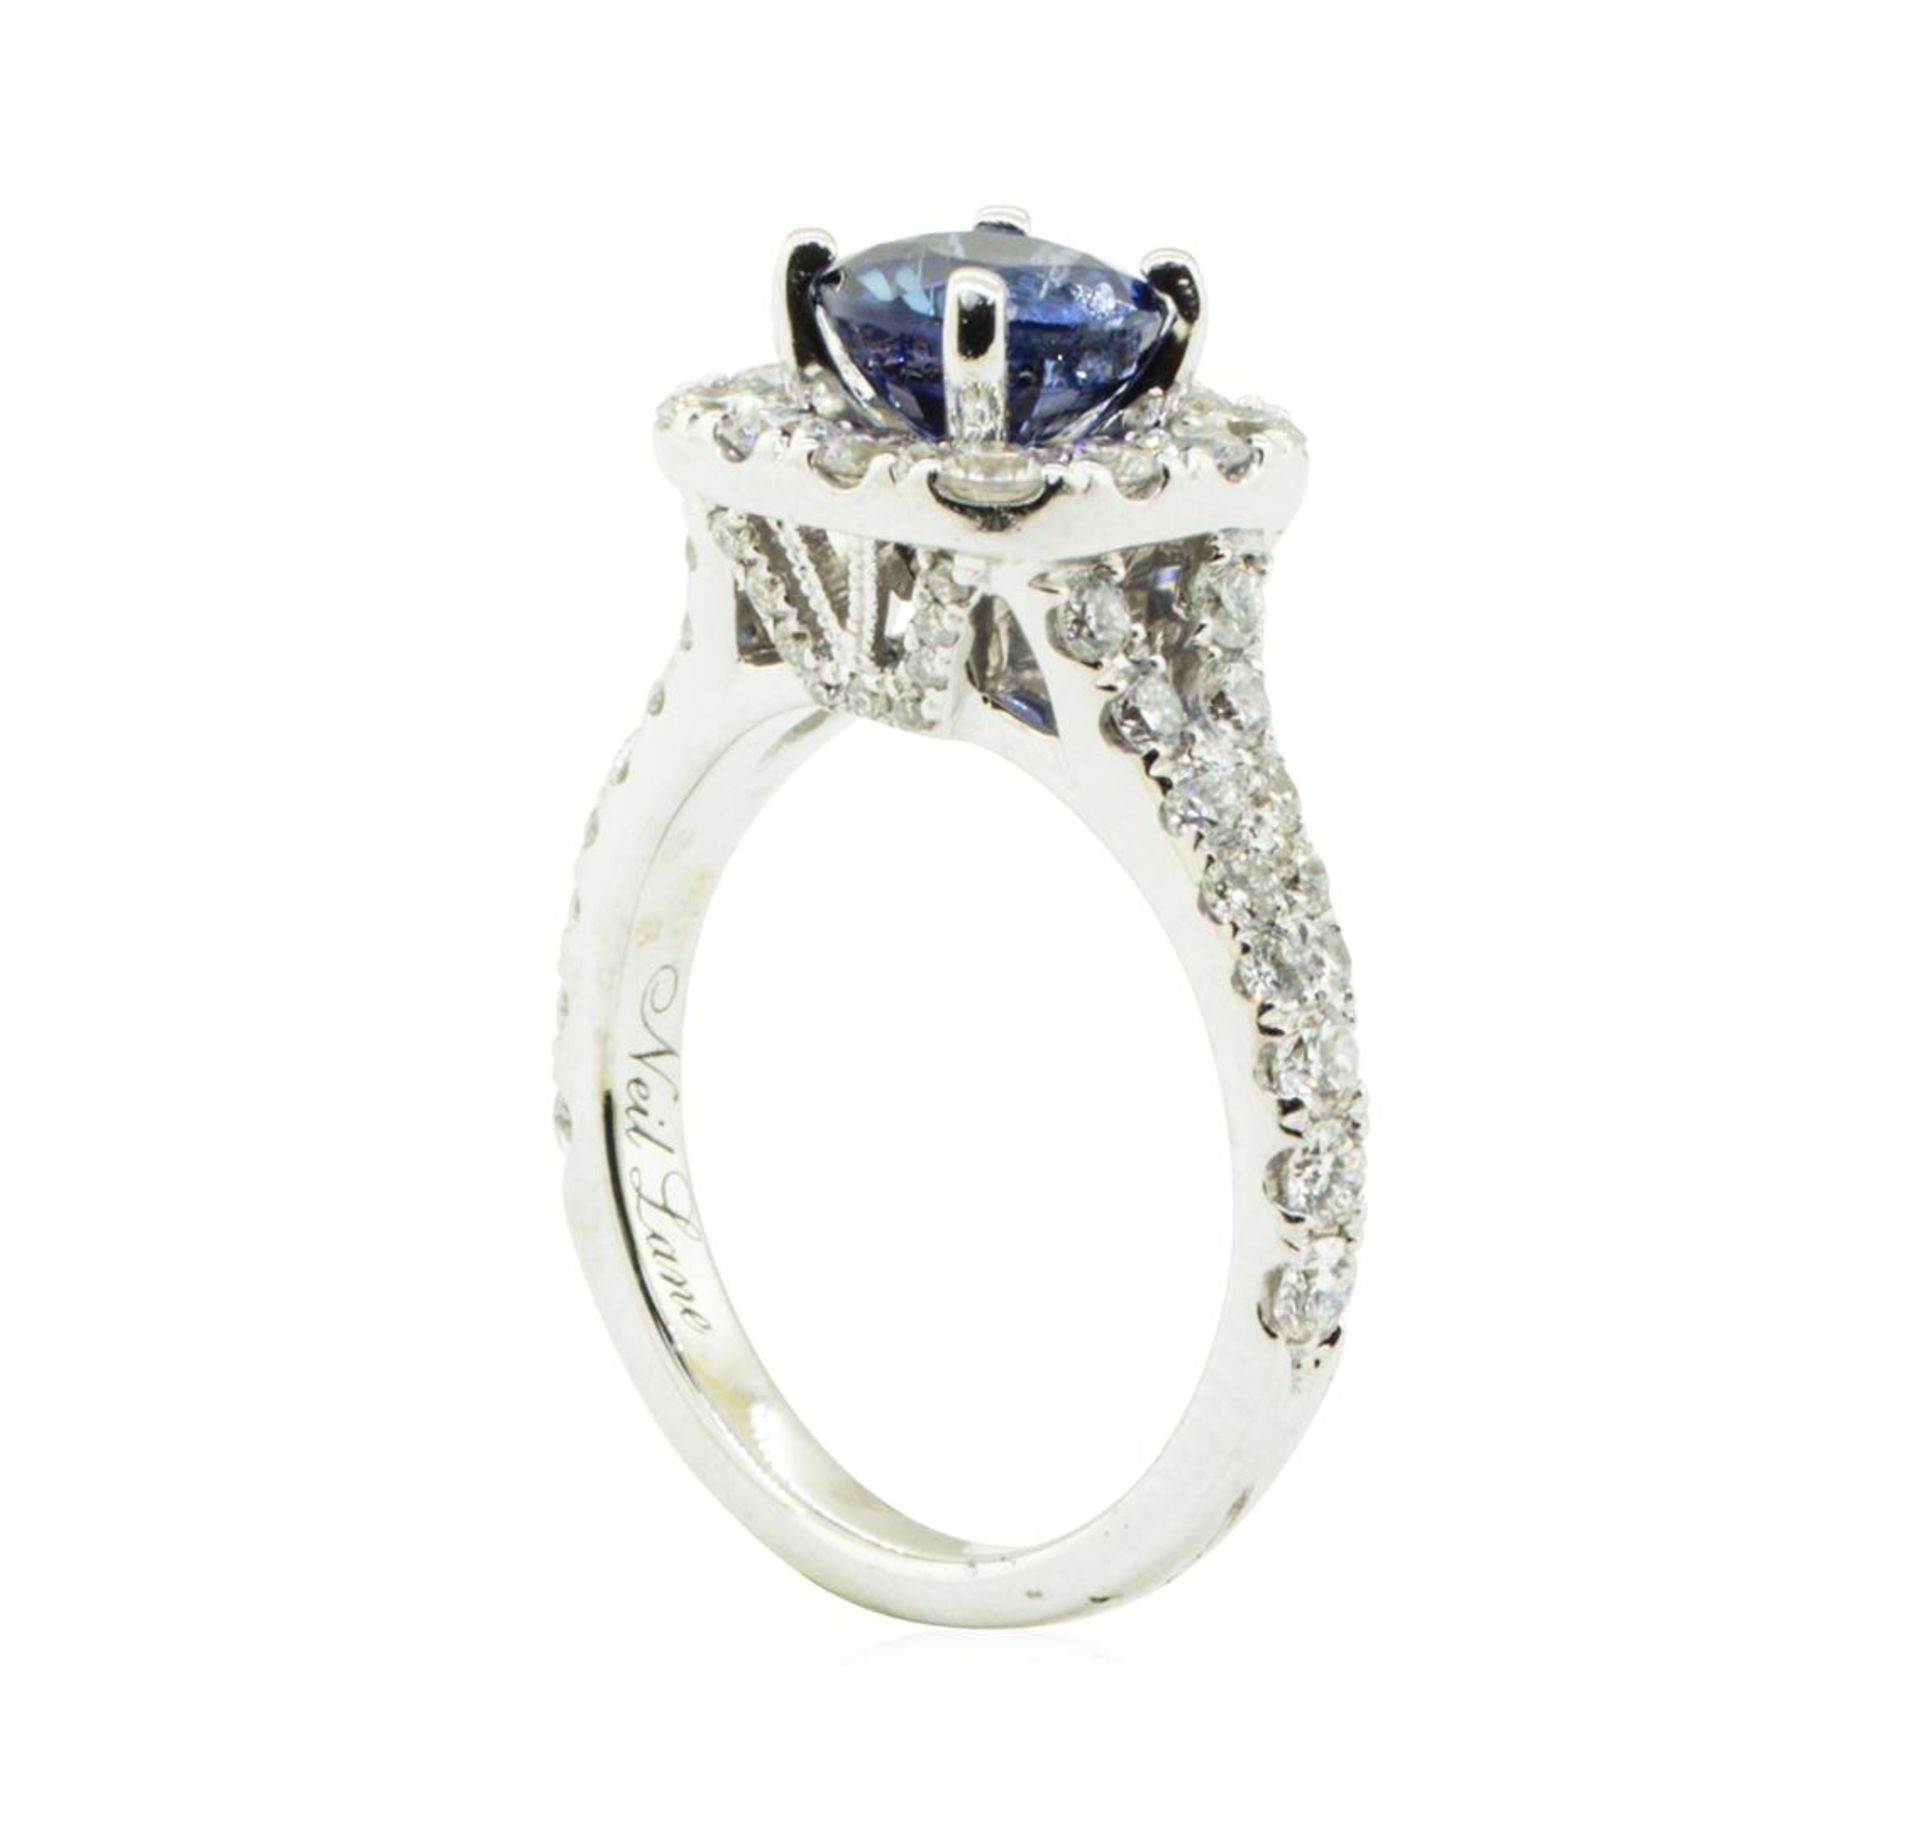 2.47 ctw Round Brilliant Blue Sapphire And Diamond Ring - 14KT White Gold - Image 4 of 5